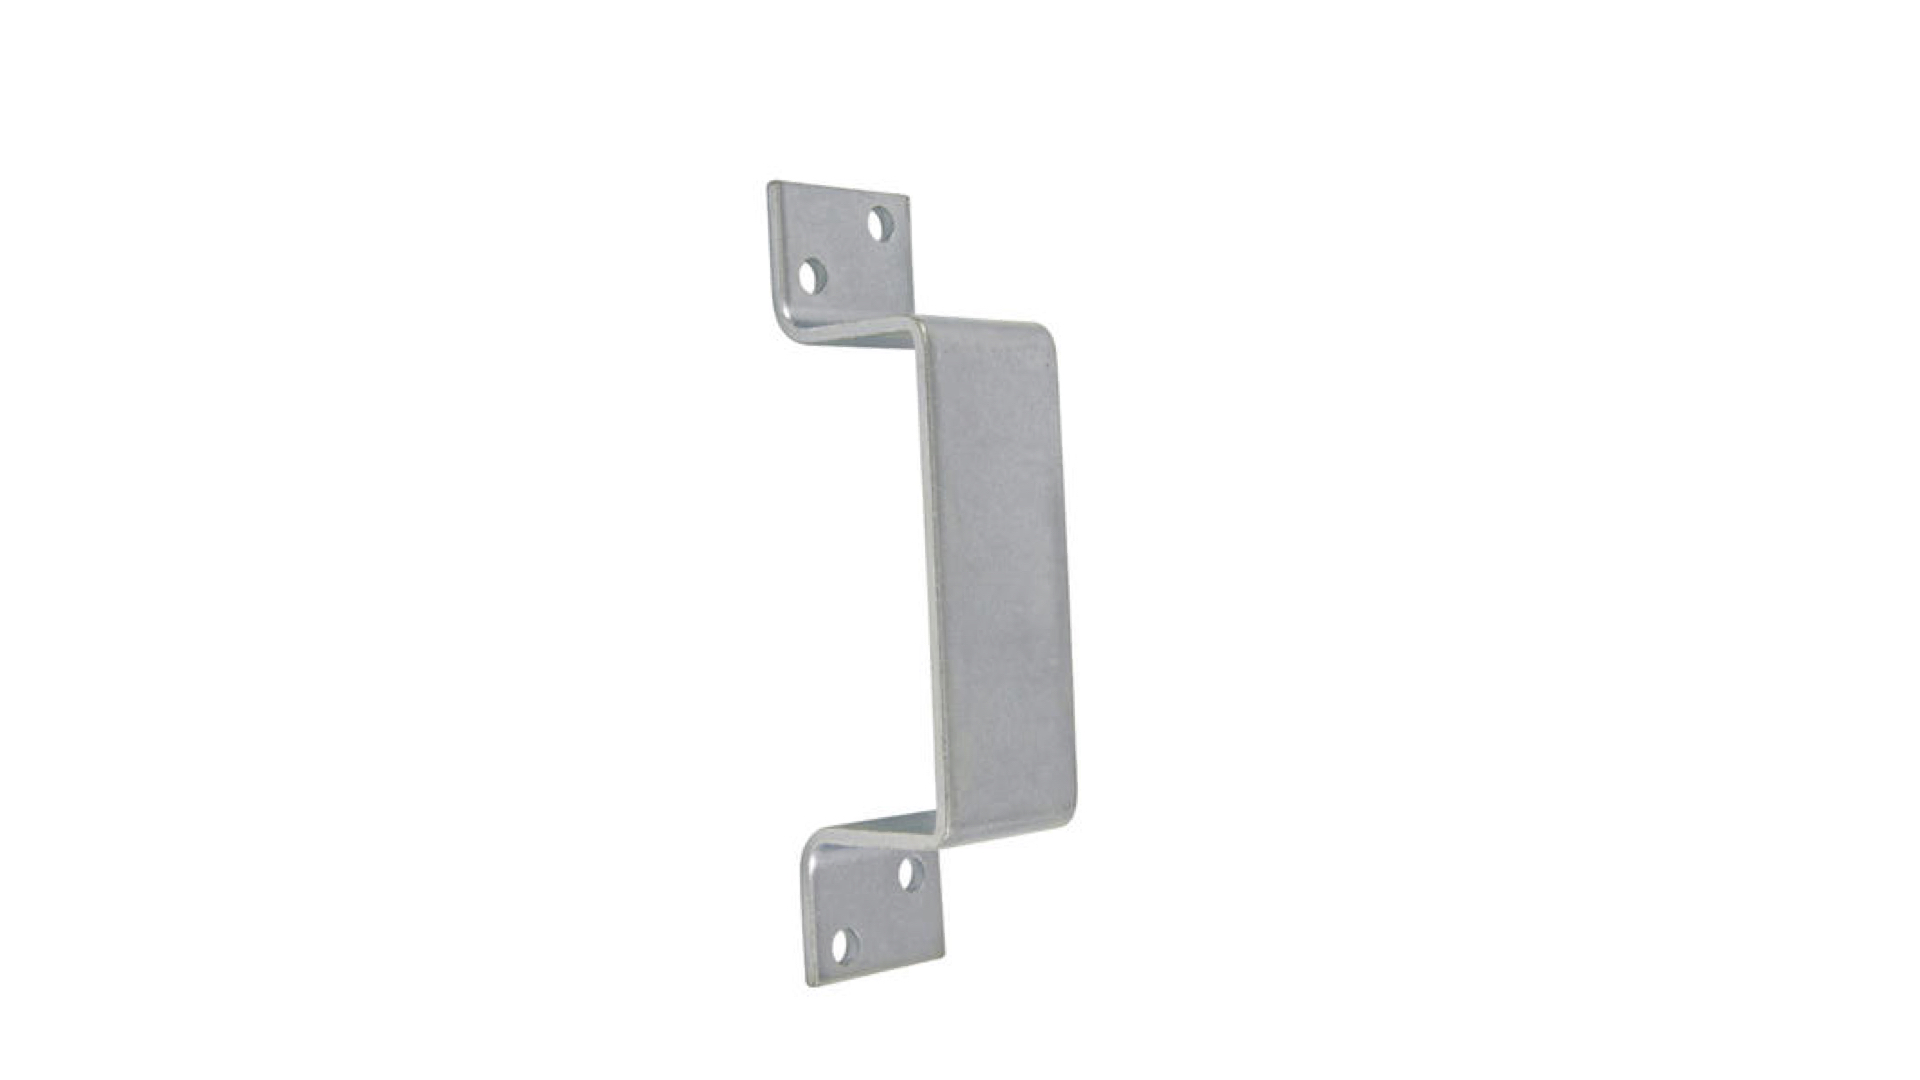 closed 2x4 bar holder that is NOT secure